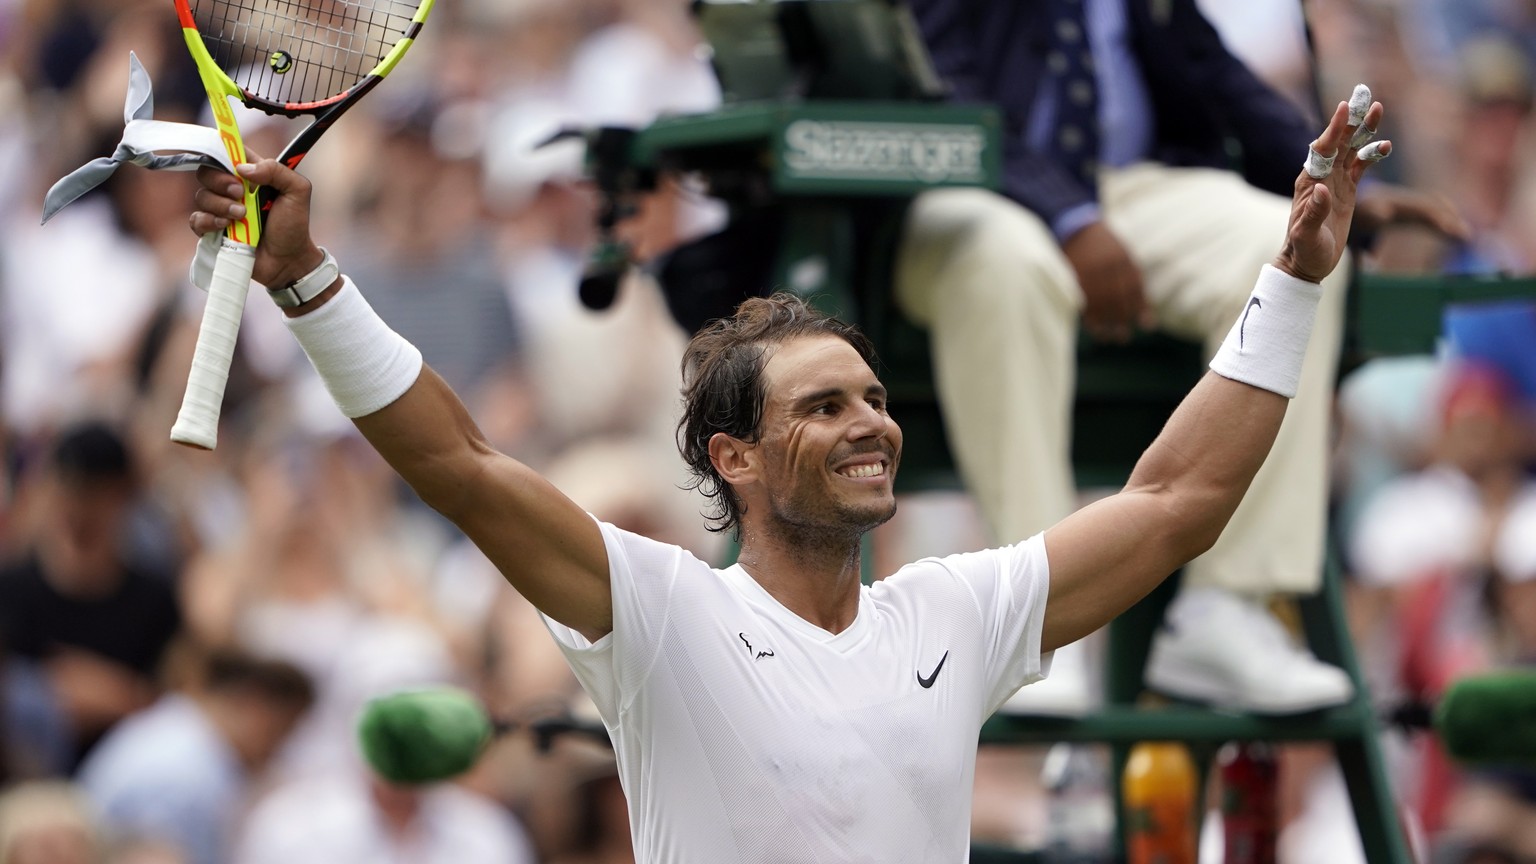 epa07703583 Rafael Nadal of Spain celebrates his win over Joao Sousa of Portugal in their fourth round match during the Wimbledon Championships at the All England Lawn Tennis Club, in London, Britain, ...